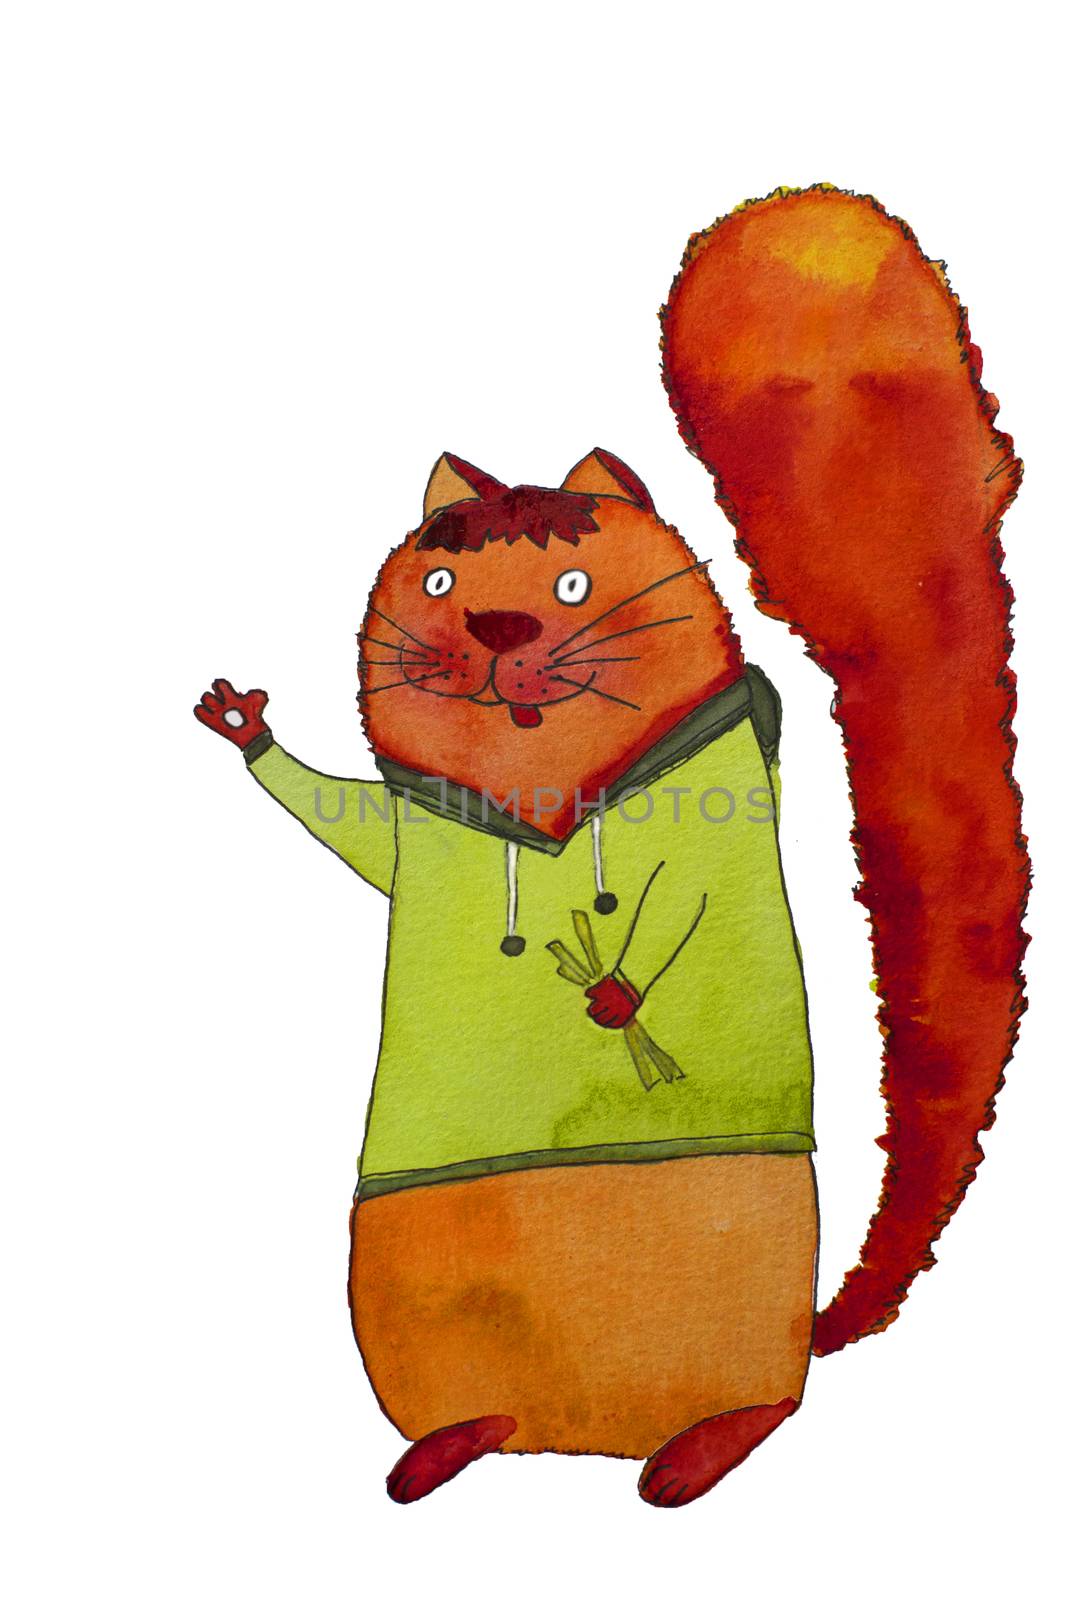 A closeup portrait of a cute red cat looking at camera, dressed in a warm green jacket. Hand painted watercolor illustration isolated on a white background.